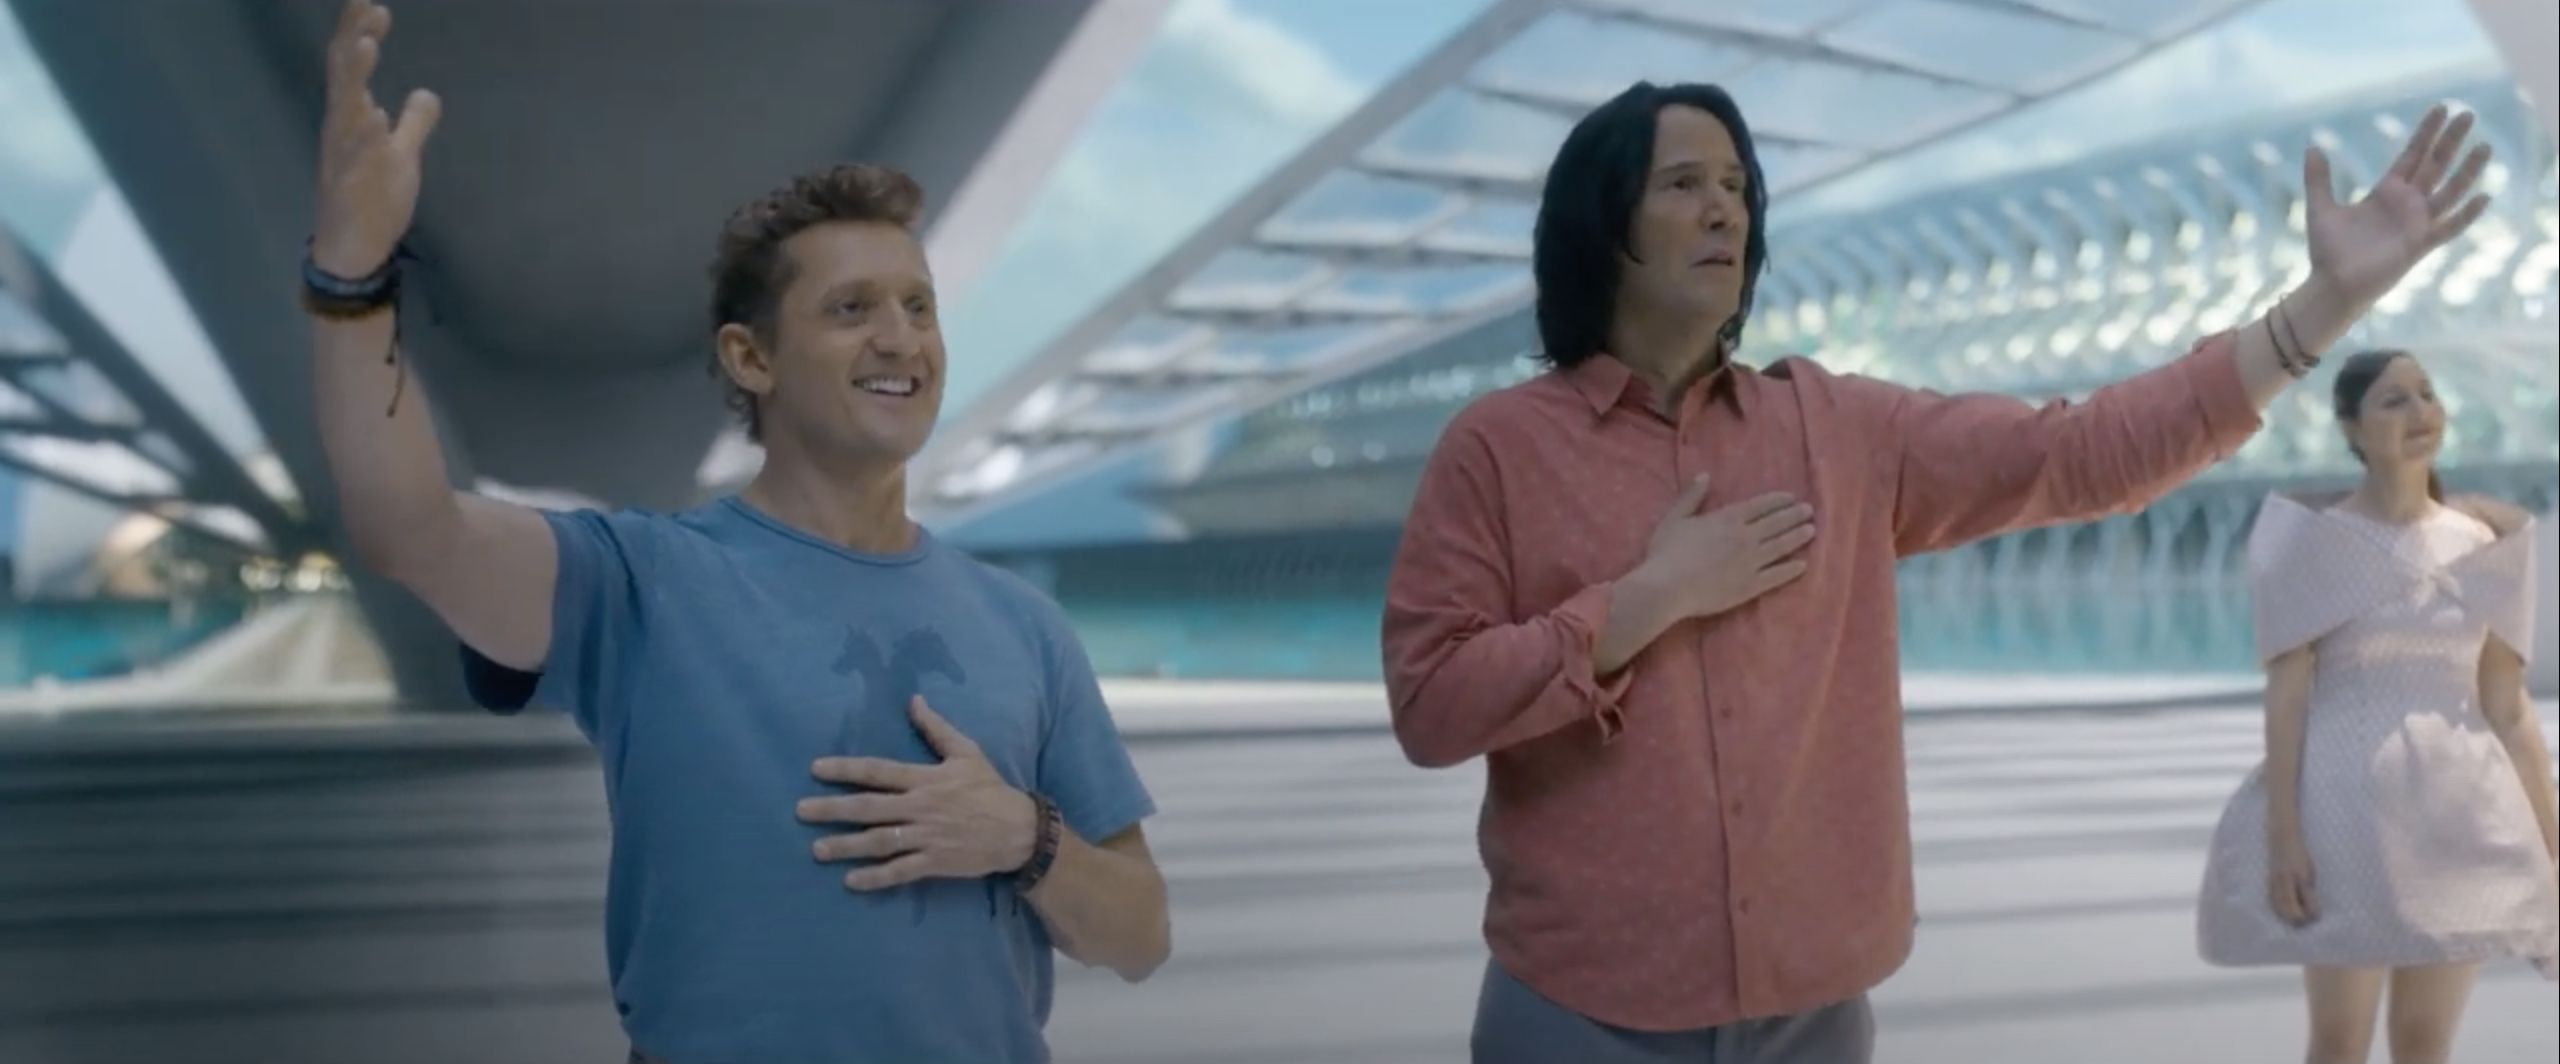 Bill and Ted Face The Music Trailer Image #9